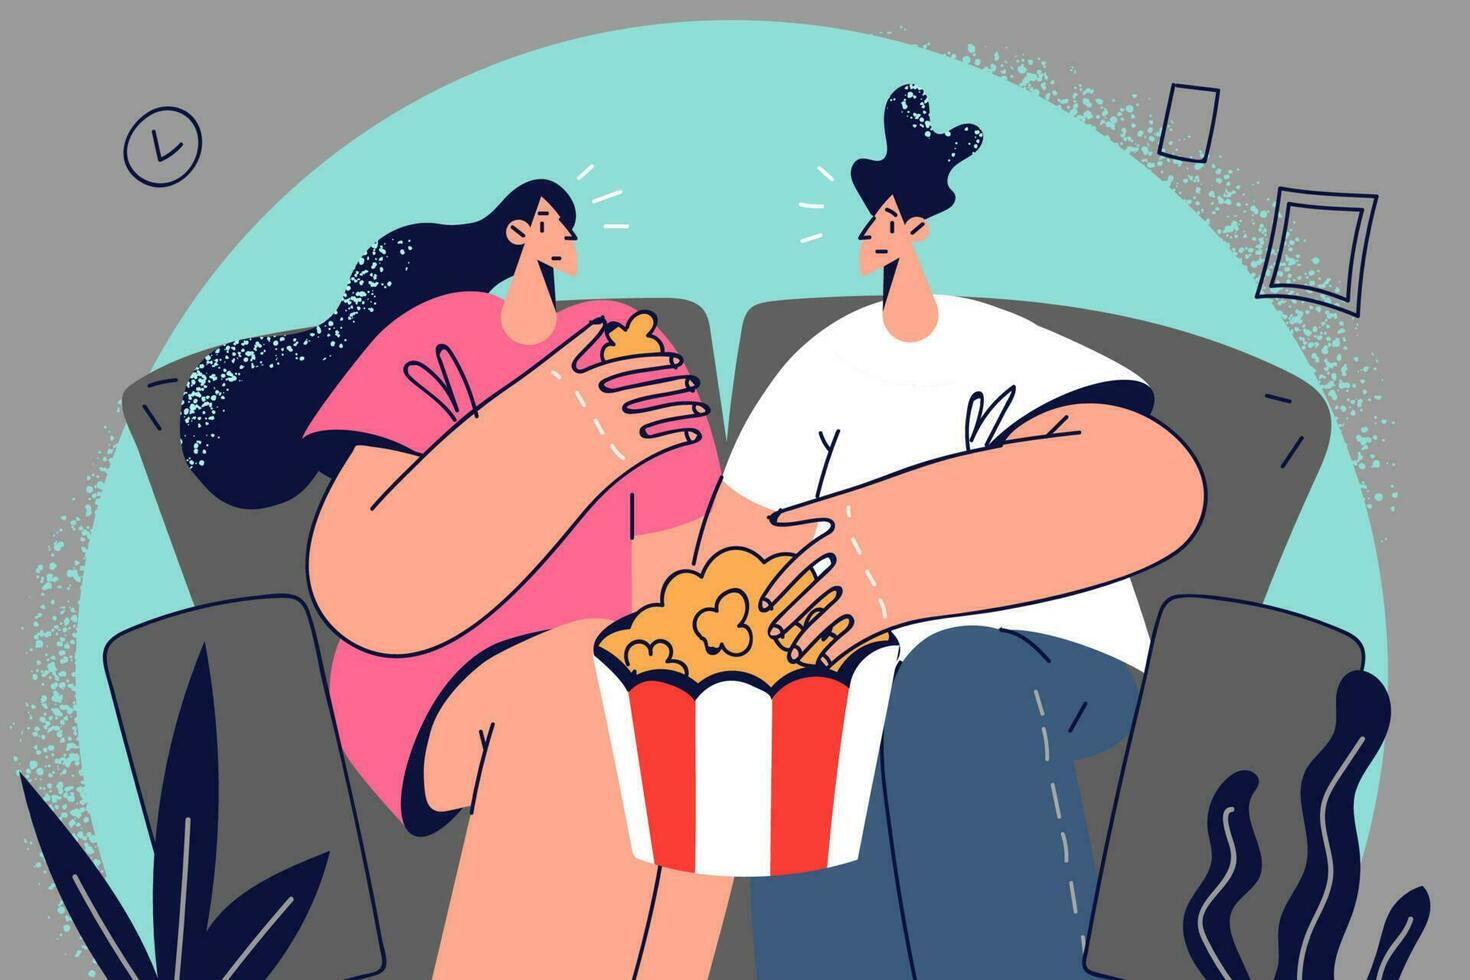 Happy couple sitting on couch eating popcorn watching movie together. Smiling man and woman relaxing on sofa enjoying cinema. Vector illustration.